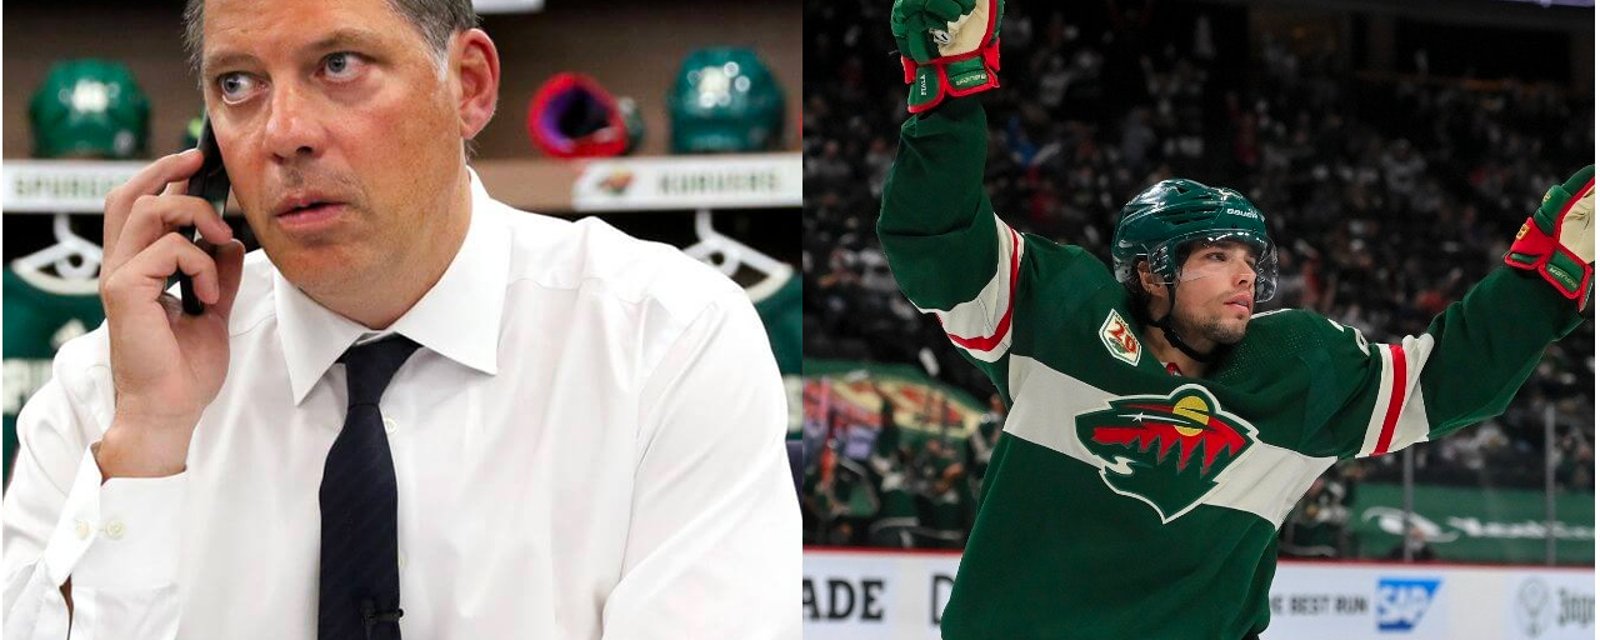 Feud erupts between Wild GM Guerin and free agent Kevin Fiala